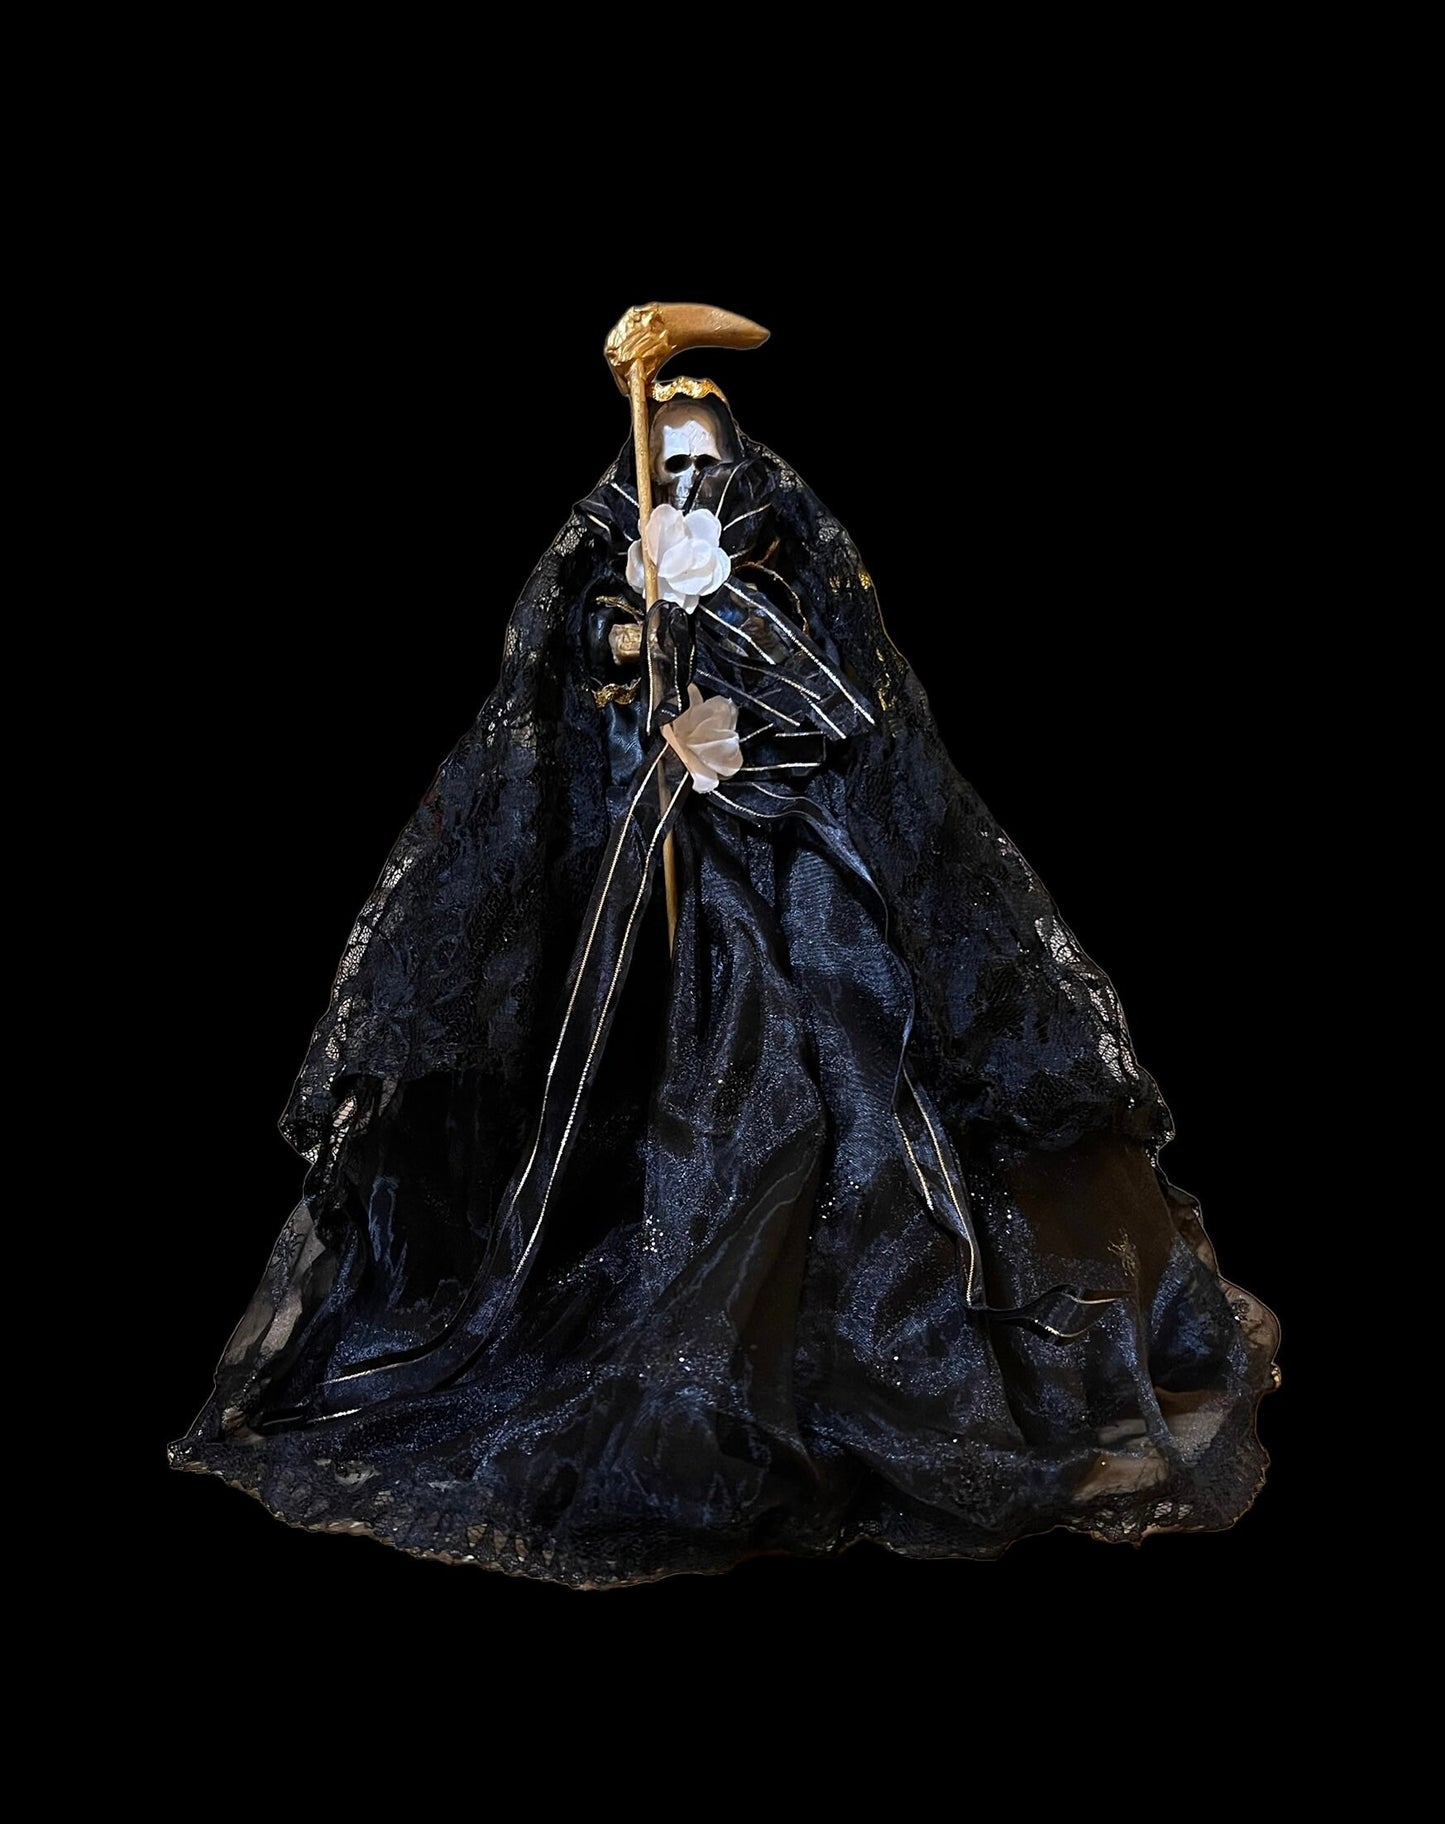 12” Santa Muerte Negra Statue with Dress + Baptized + Fixed + Made in Mexico + 24K Gold Leaf on Scythe